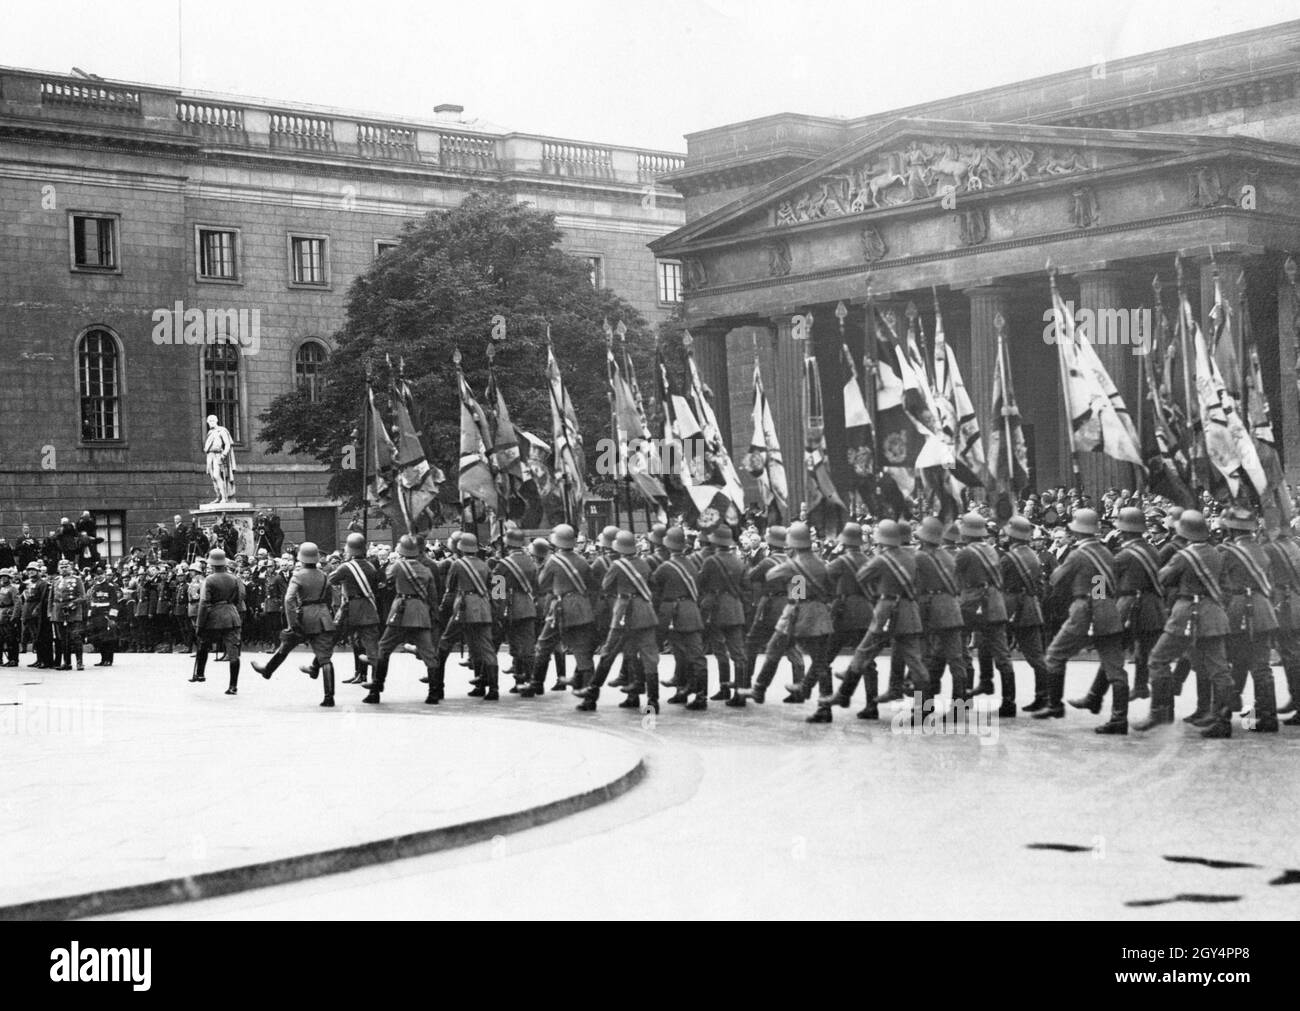 The Neue Wache Unter den Linden in Berlin, converted into a memorial for the fallen, was ceremoniously opened on June 2, 1931: the flag company of the Reichswehr marches past the guard and the guests of honor, including Reich President Paul von Hindenburg (on the left in the picture), the Reich government and Prussian state government, the heads of the branches of the armed forces, representatives of the diplomatic corps, the universities, the city of Berlin and officers of the Old Army. Next to Paul von Hindenburg the navy chief Erich Raeder and on the left presumably Major General Werner Stock Photo